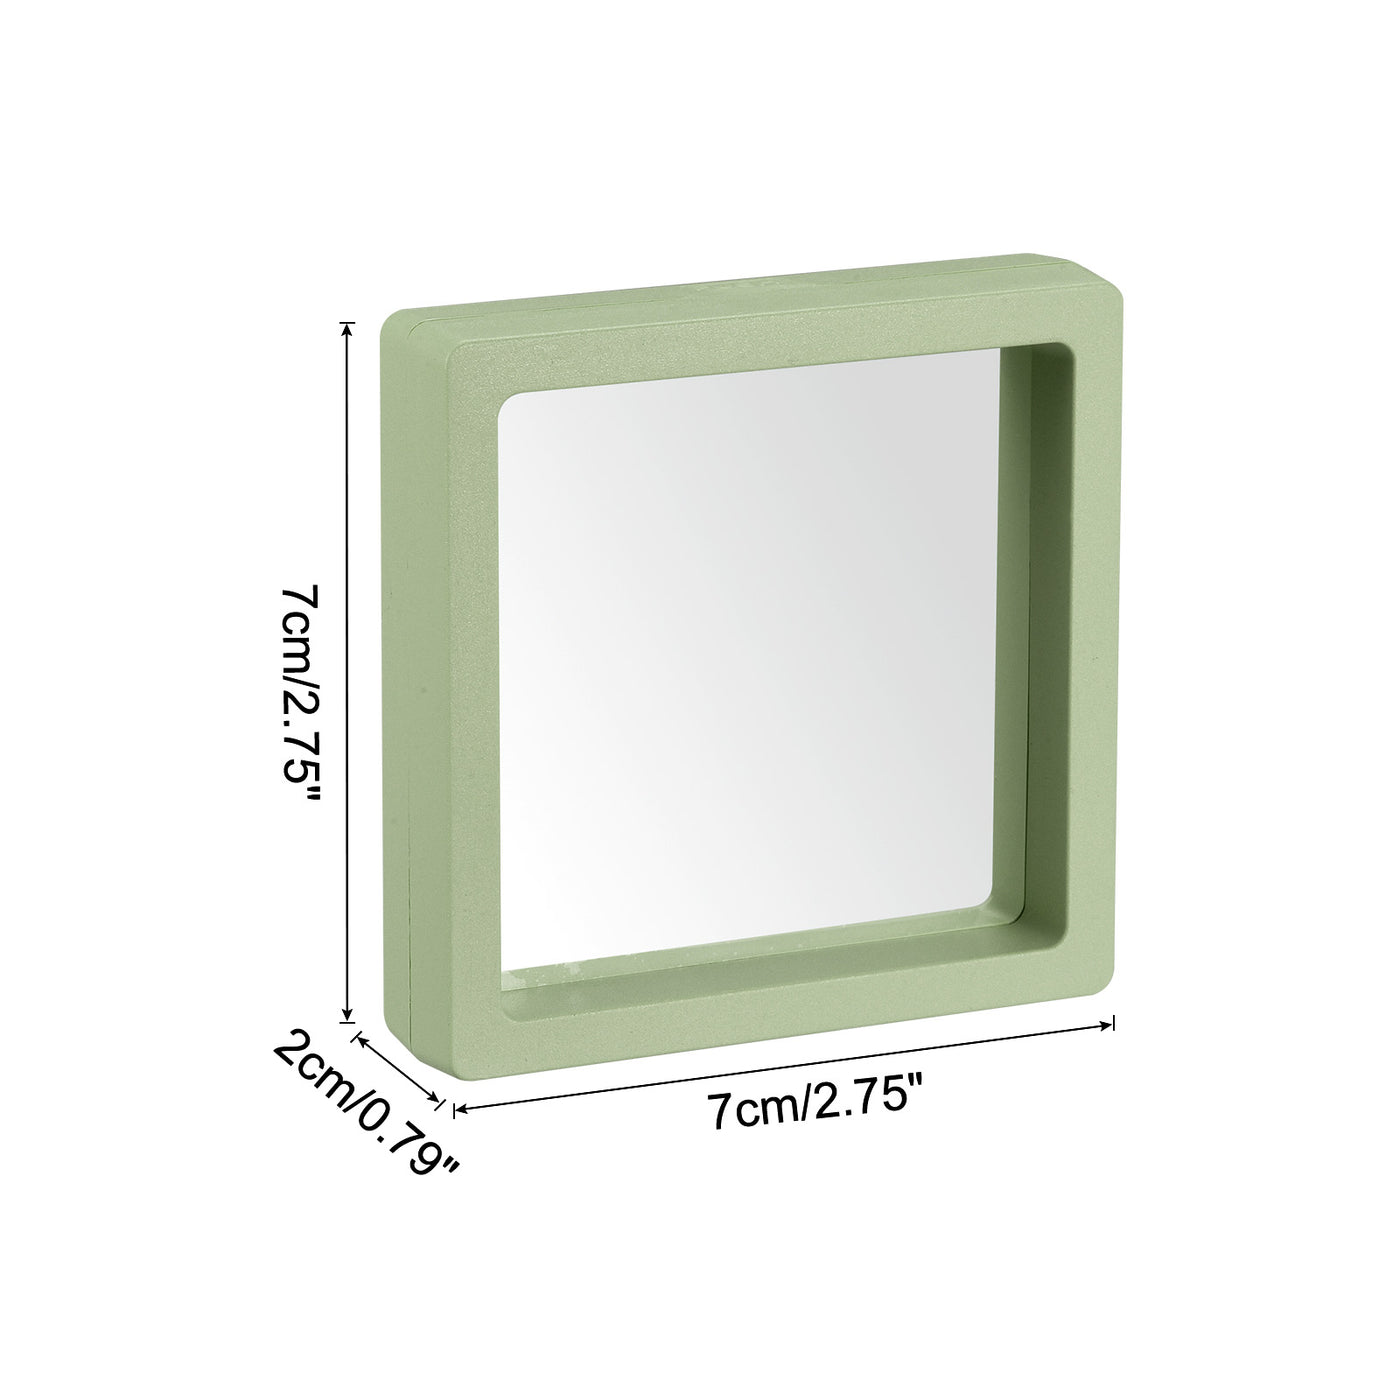 Harfington Floating Thin Film Display Box with Base 7cm x 7cm x 2cm Green Pack of 6